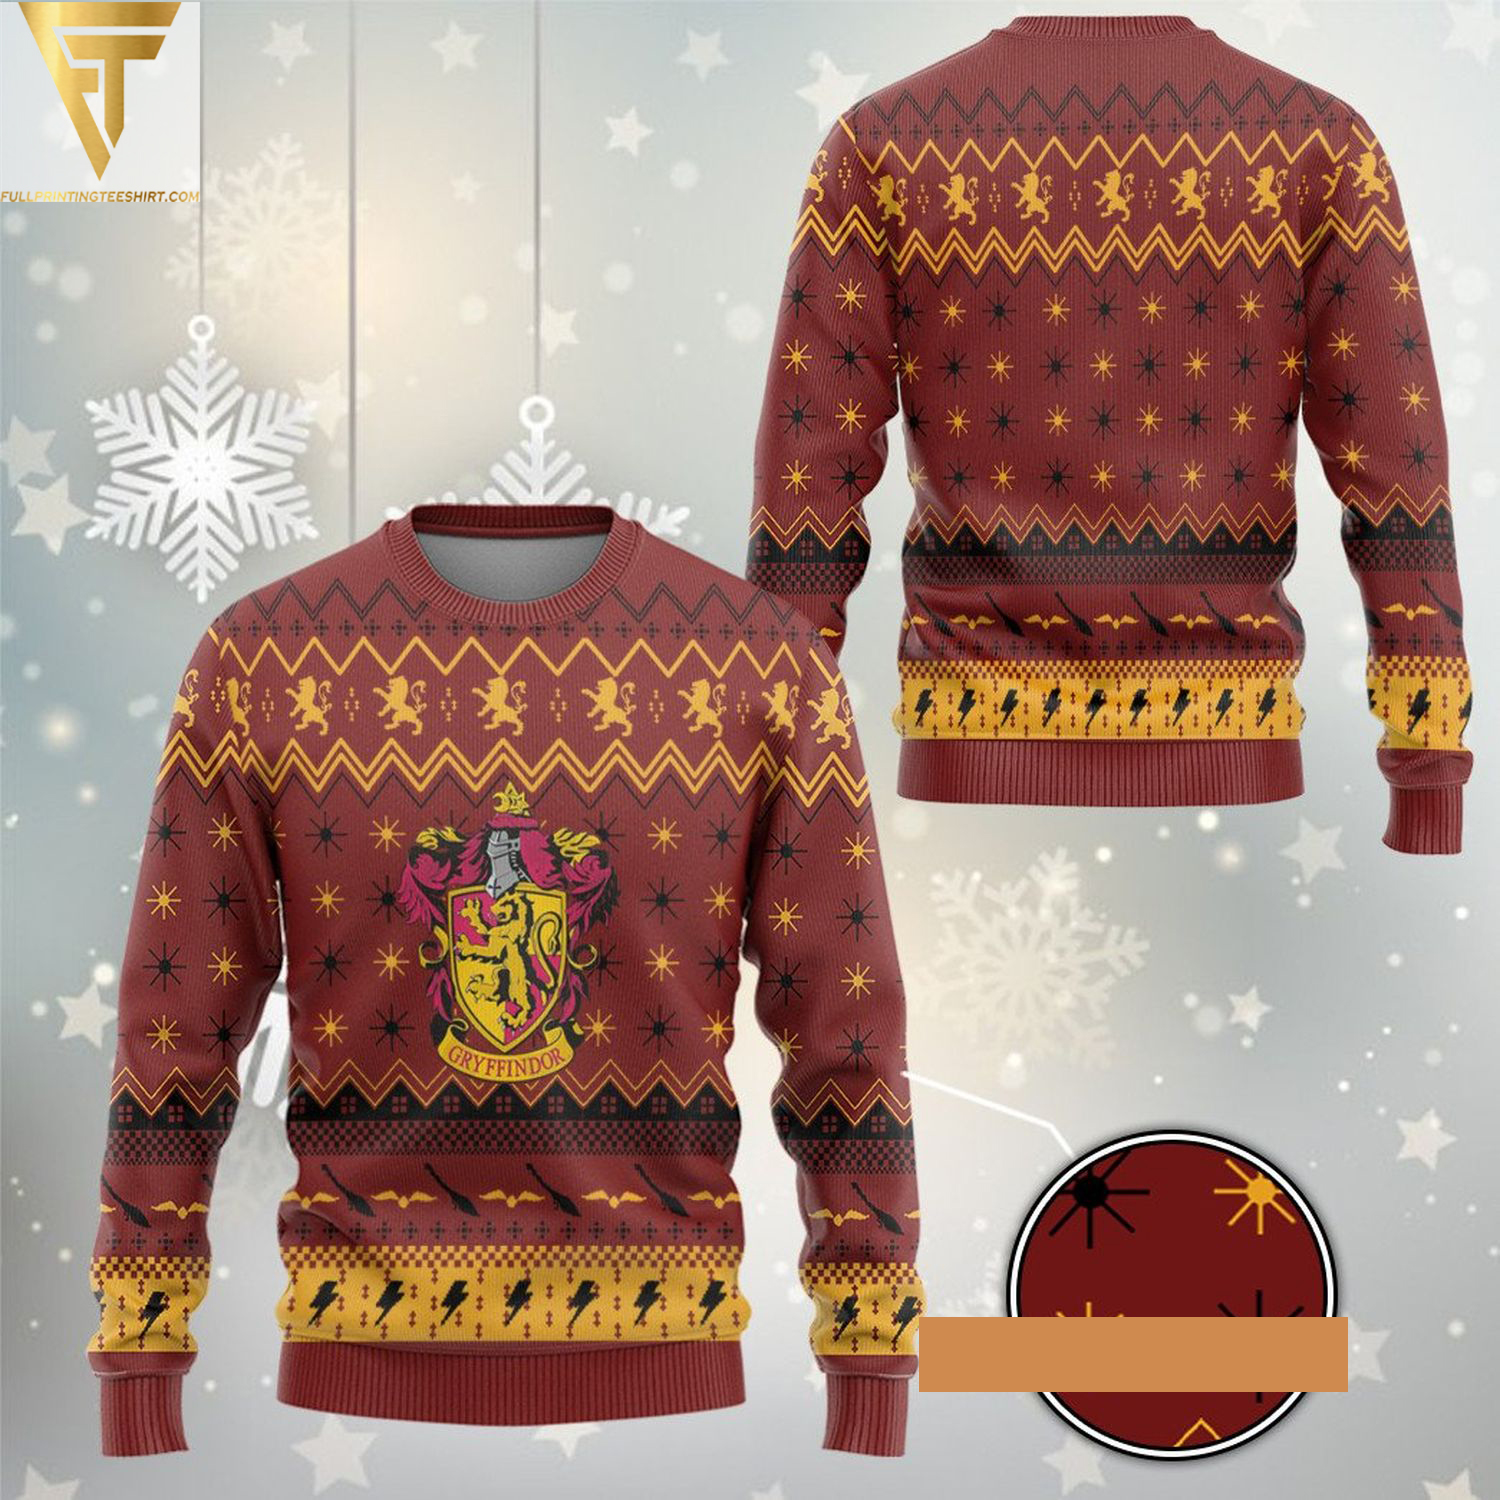 Harry potter gryffindor holiday ugly christmas sweater - Copy (2)